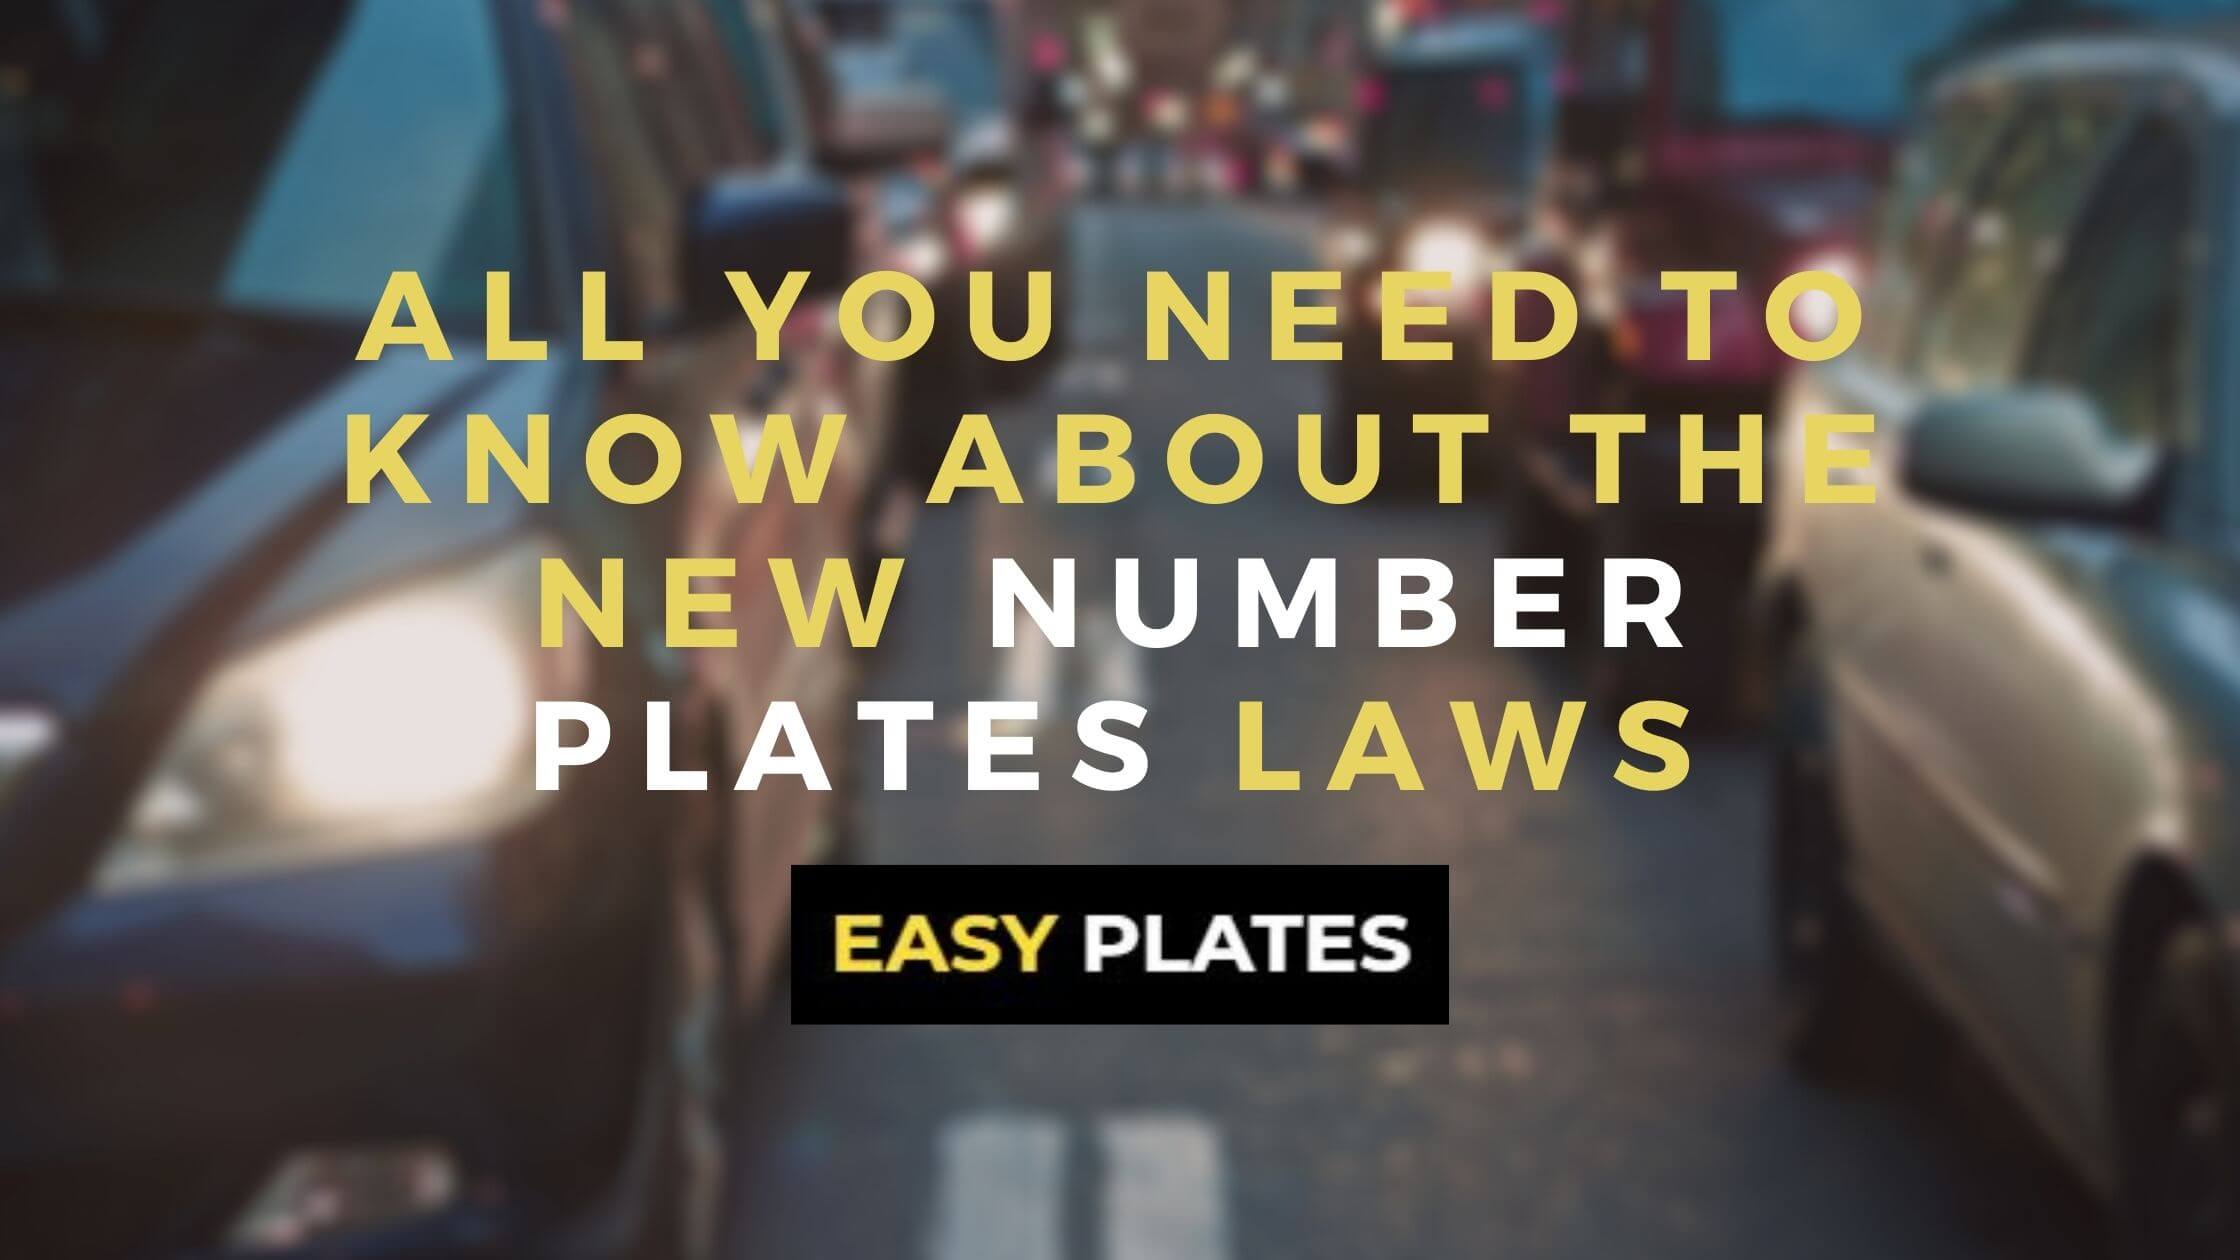 All You Need to Know About the New Number Plates Laws